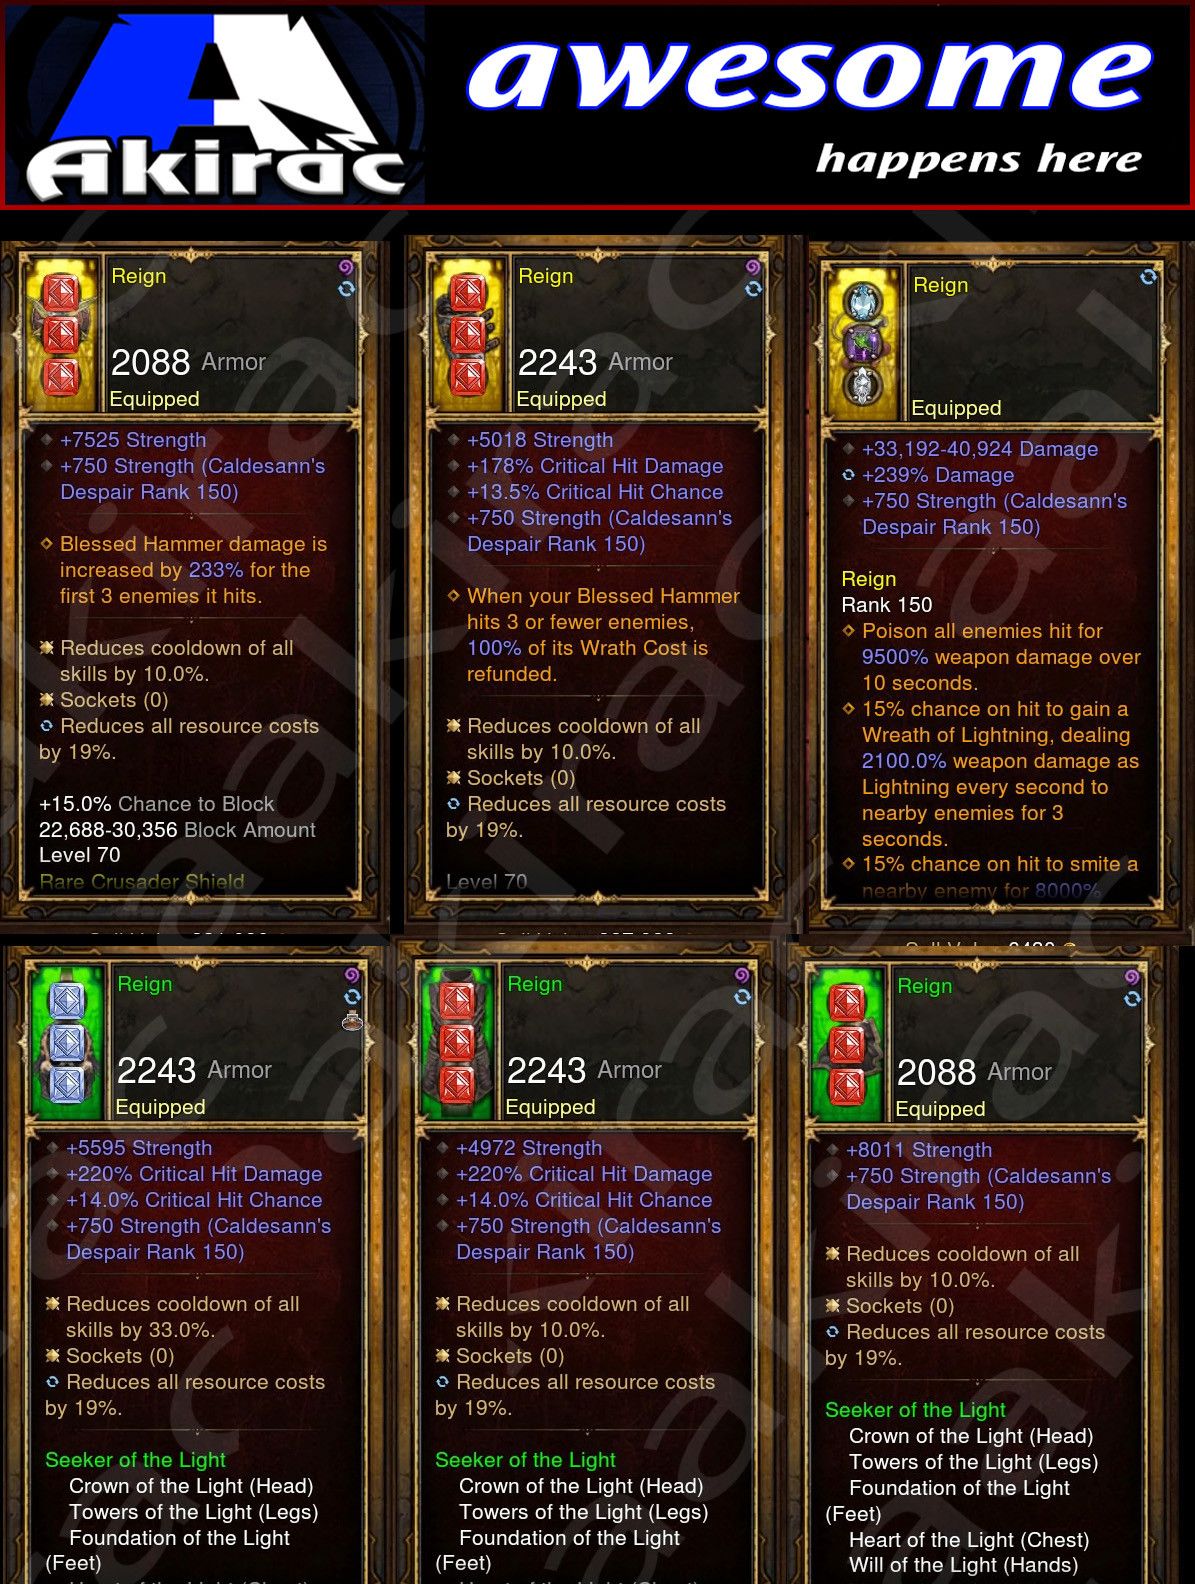 Diablo 3 Immortal v2 Light Crusader Modded Set for Rift 150 Reign Diablo 3 Mods ROS Seasonal and Non Seasonal Save Mod - Modded Items and Gear - Hacks - Cheats - Trainers for Playstation 4 - Playstation 5 - Nintendo Switch - Xbox One